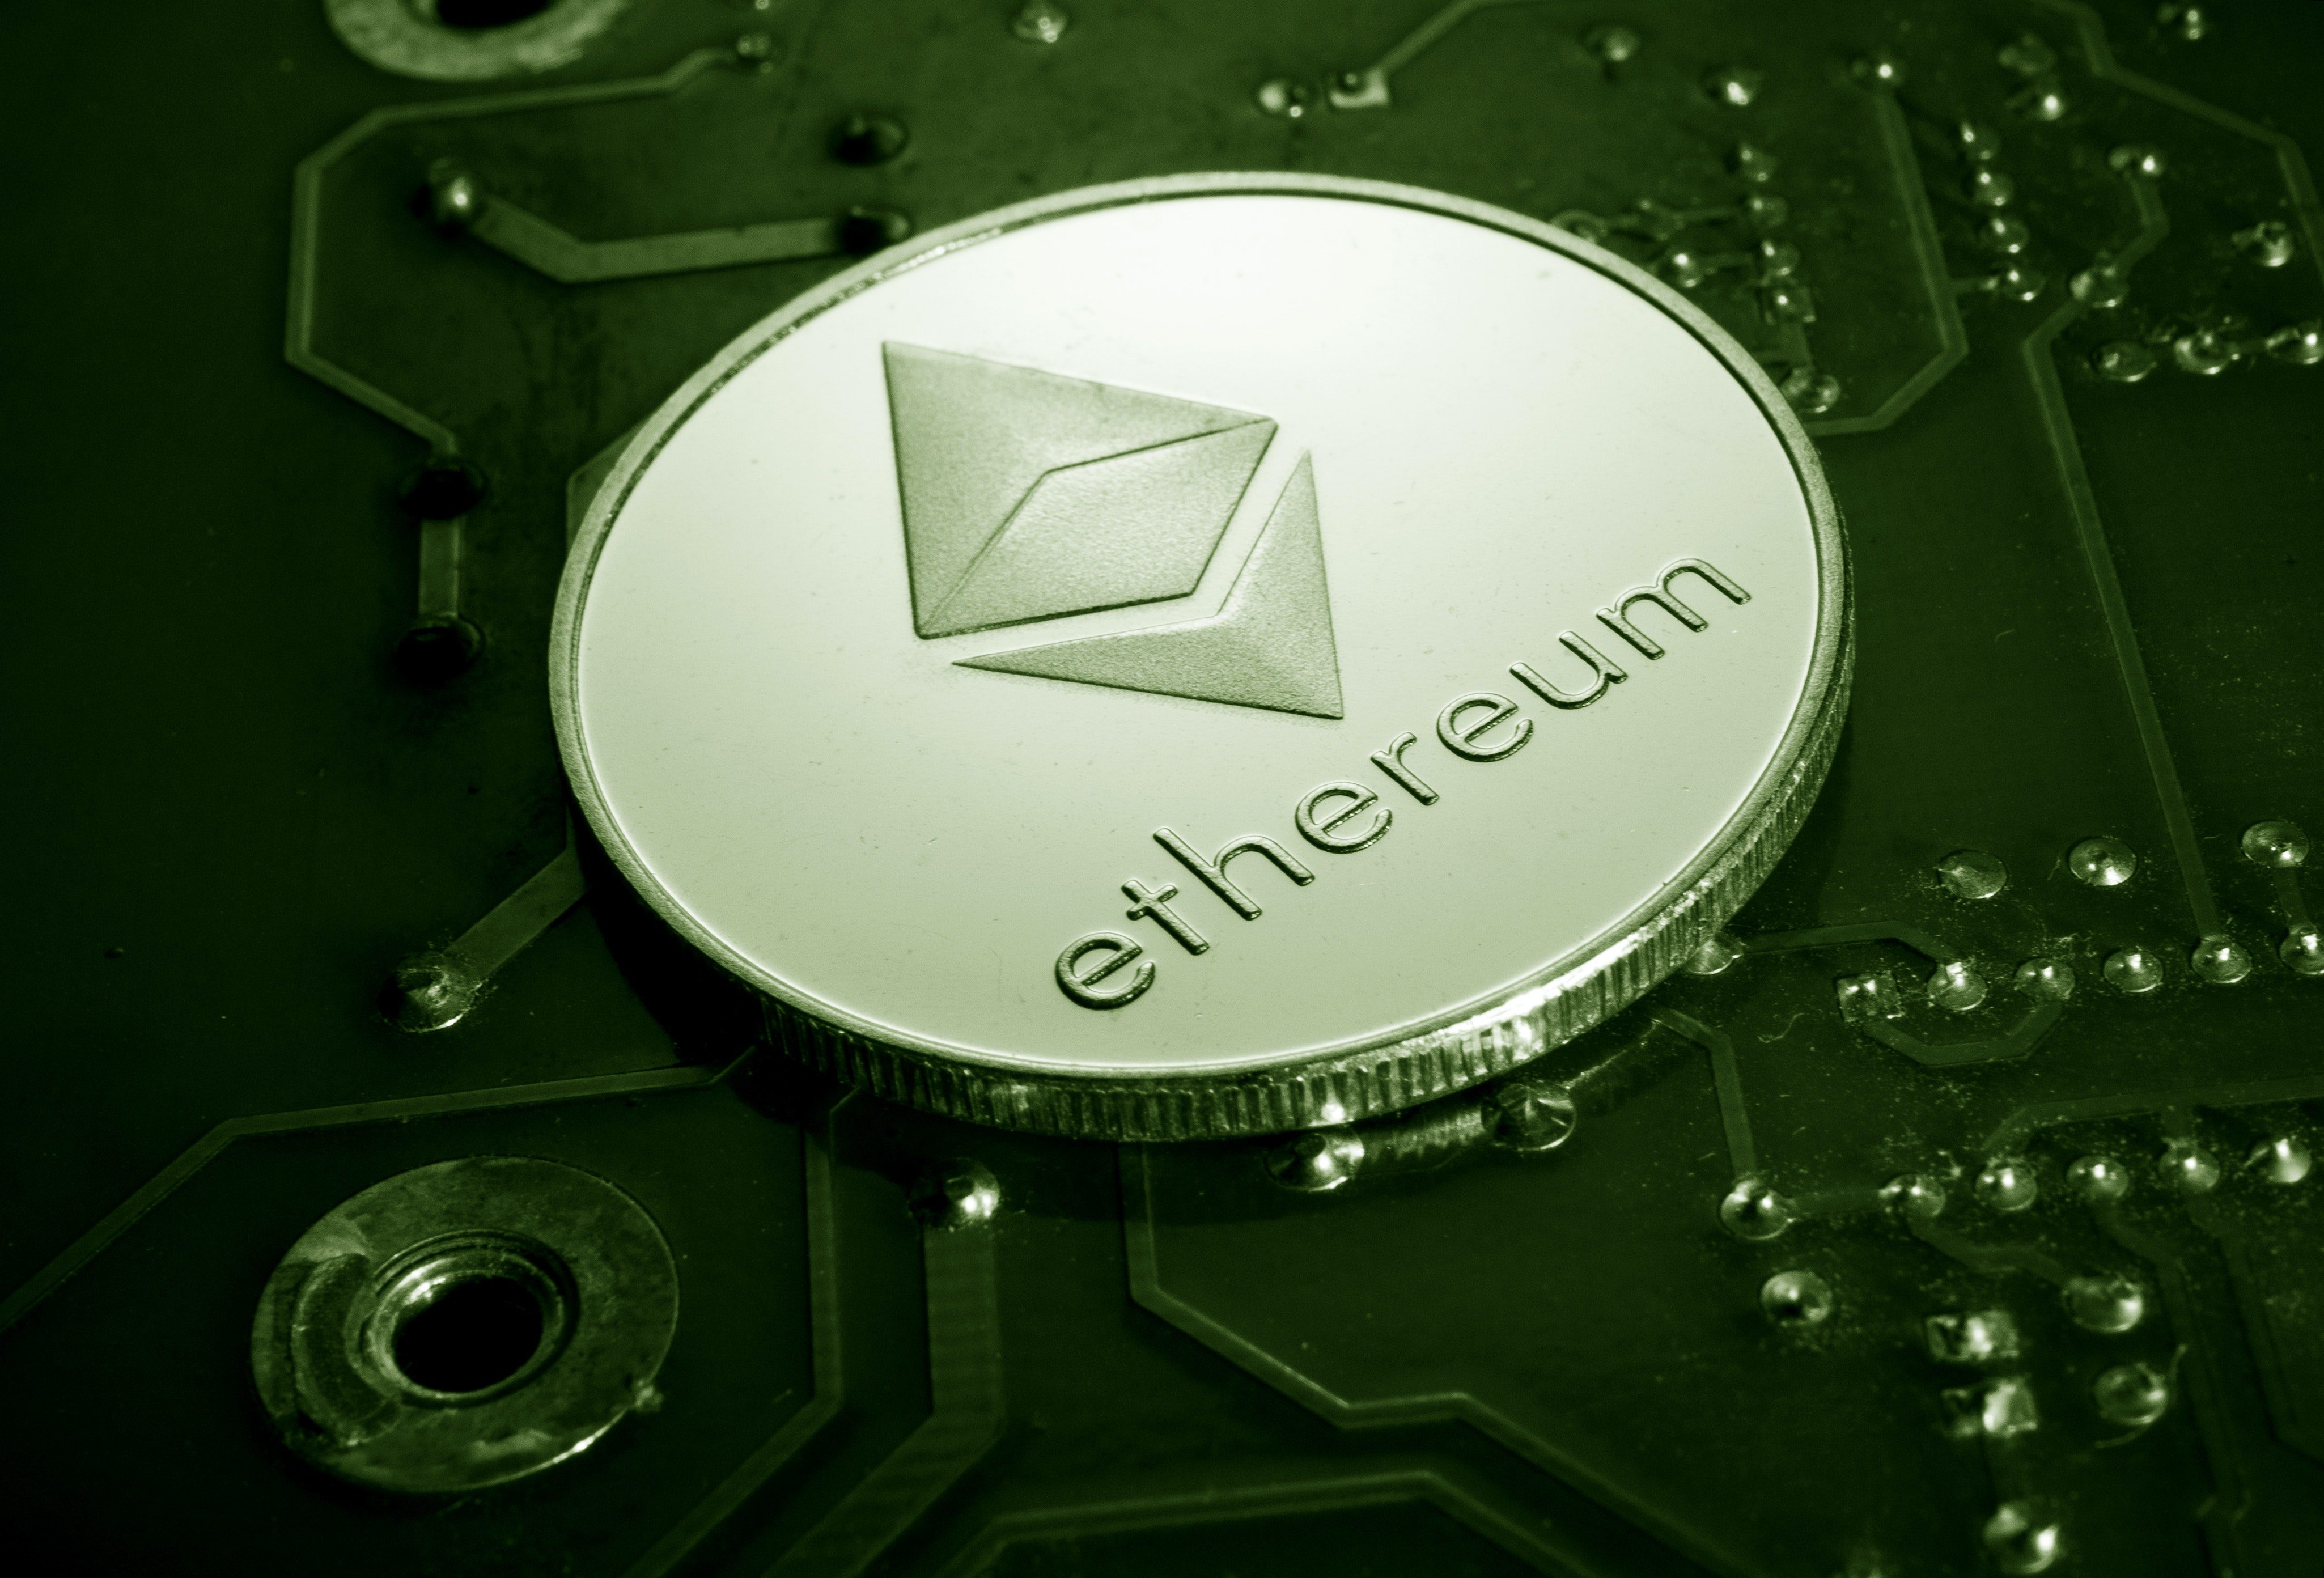 An Ether coin on a motherboard.